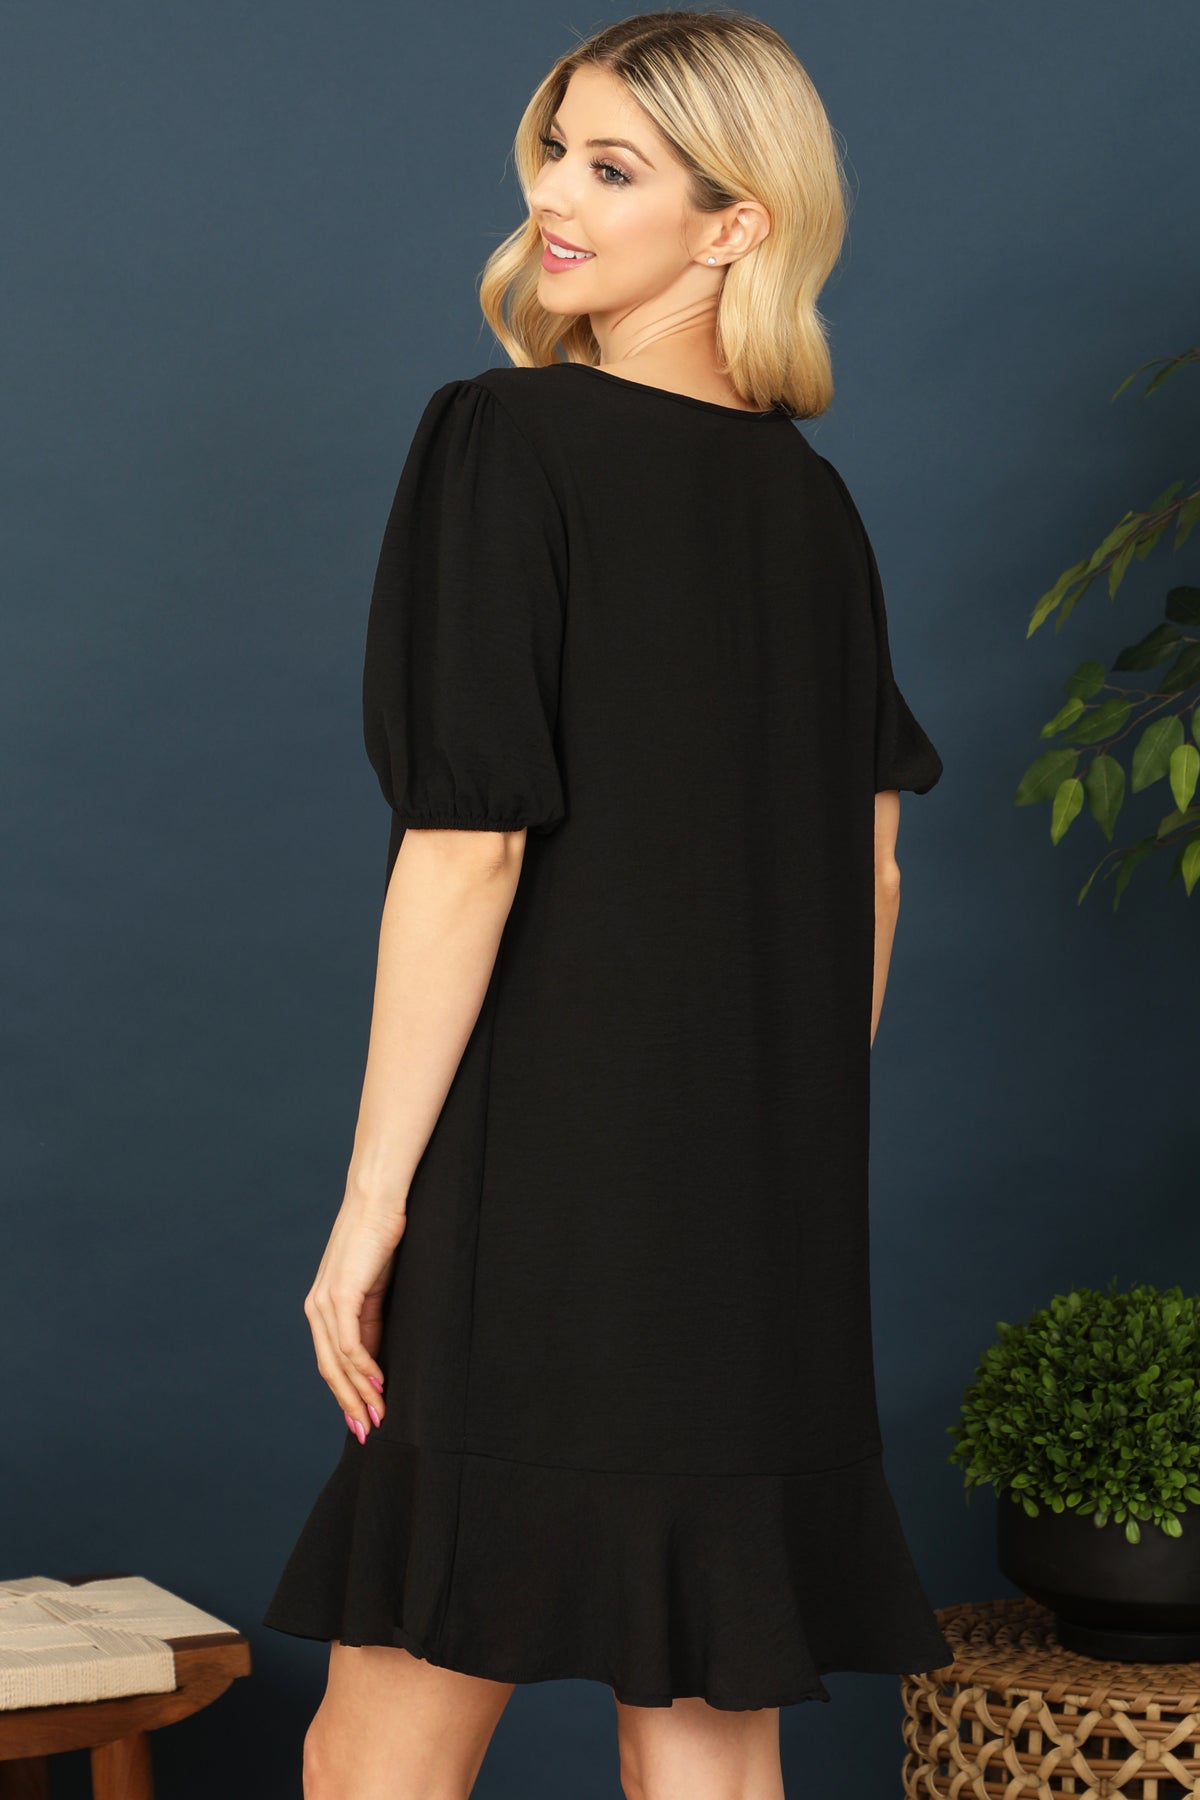 BOAT NECK PUFF SLEEVE RUFFLE HEM SOLID DRESS 2-2-2-2 (NOW $ 5.75 ONLY!)